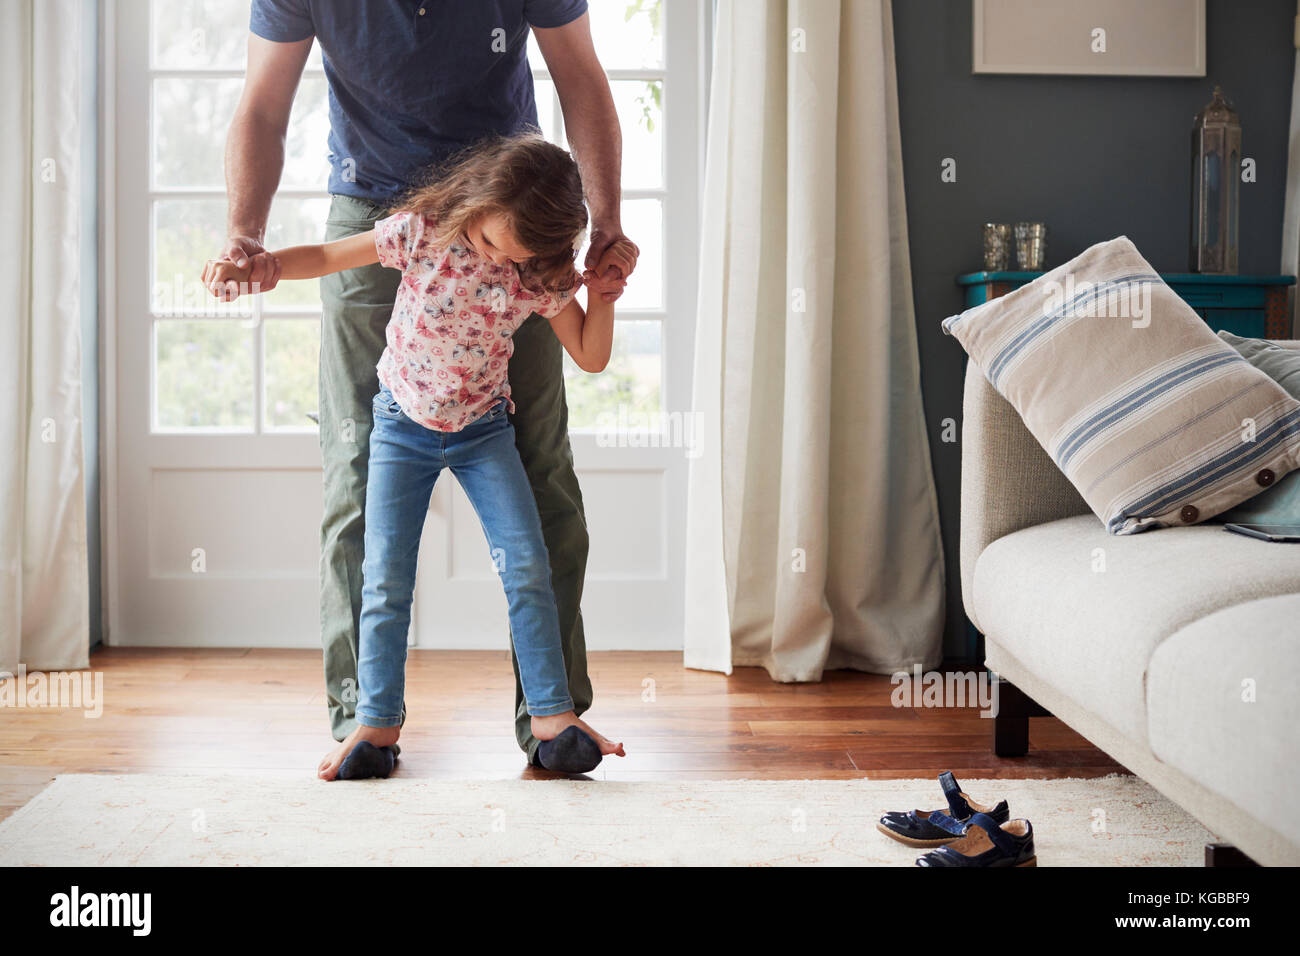 Girl balances walking on father’s feet at home, looking down Stock Photo